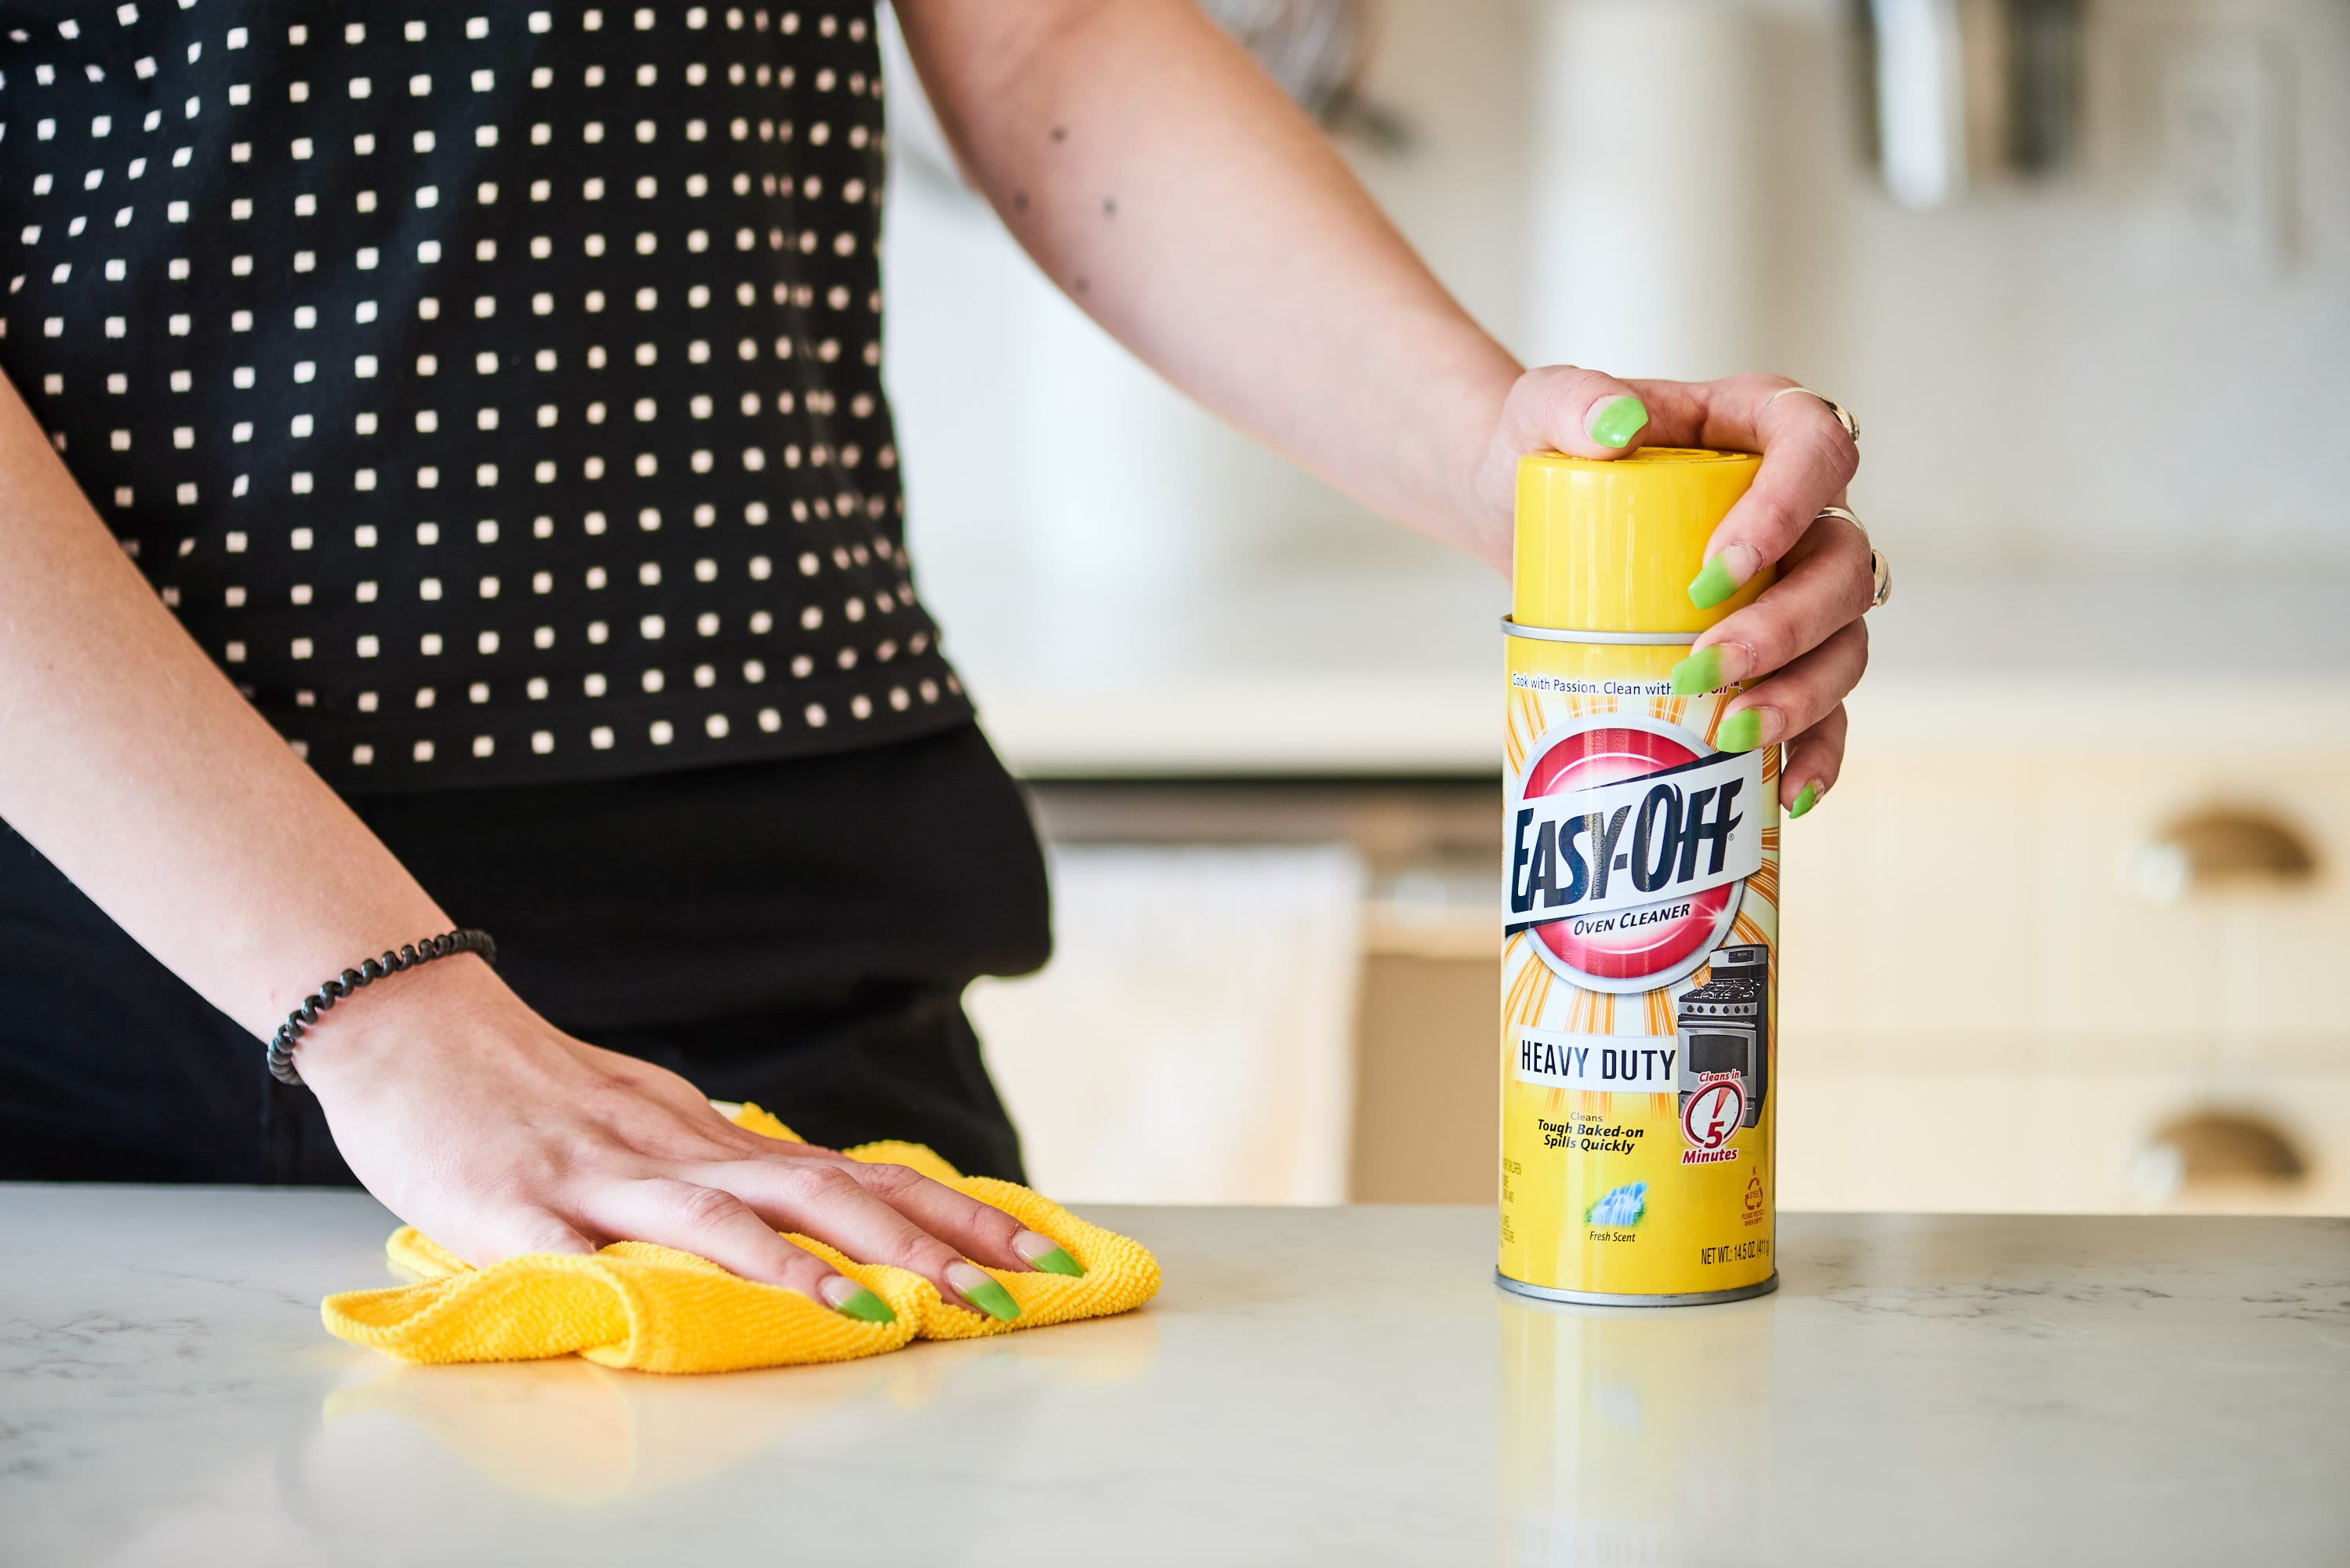 Here's When You Should Use Cooking Spray (and When You Shouldn't)